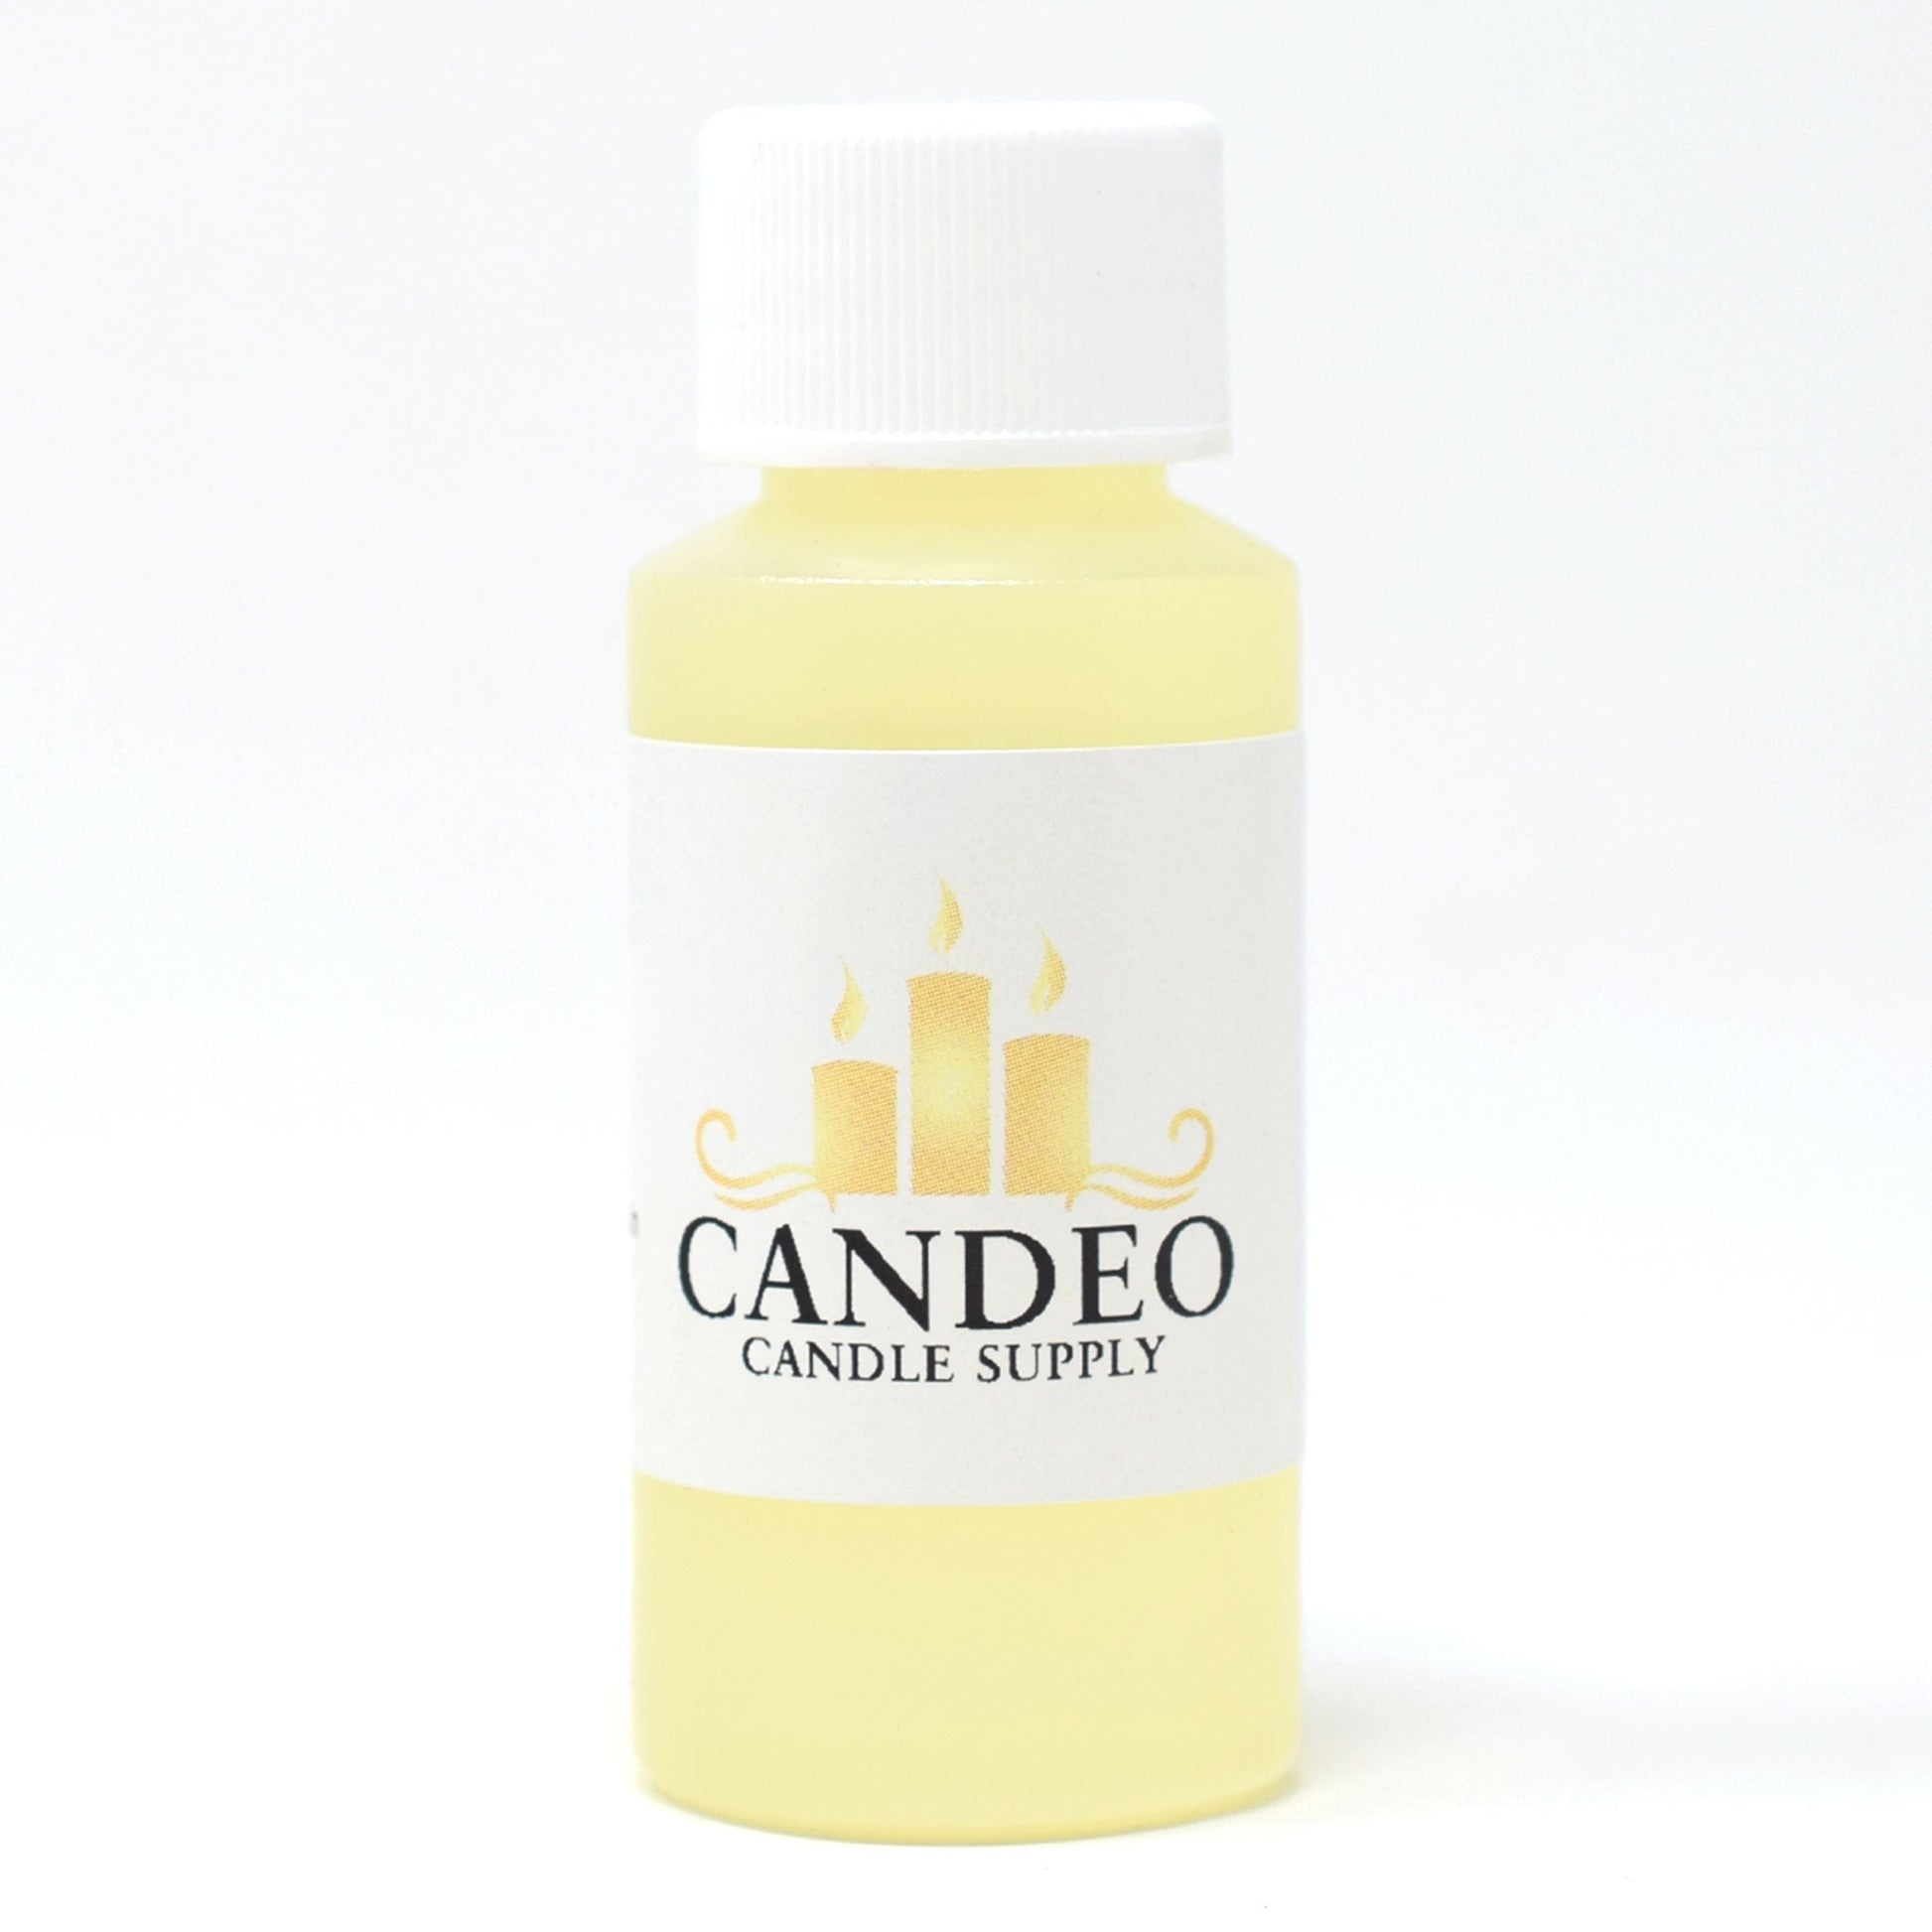 Baby Powder Fragrance Oil - Candeo Candle Supply